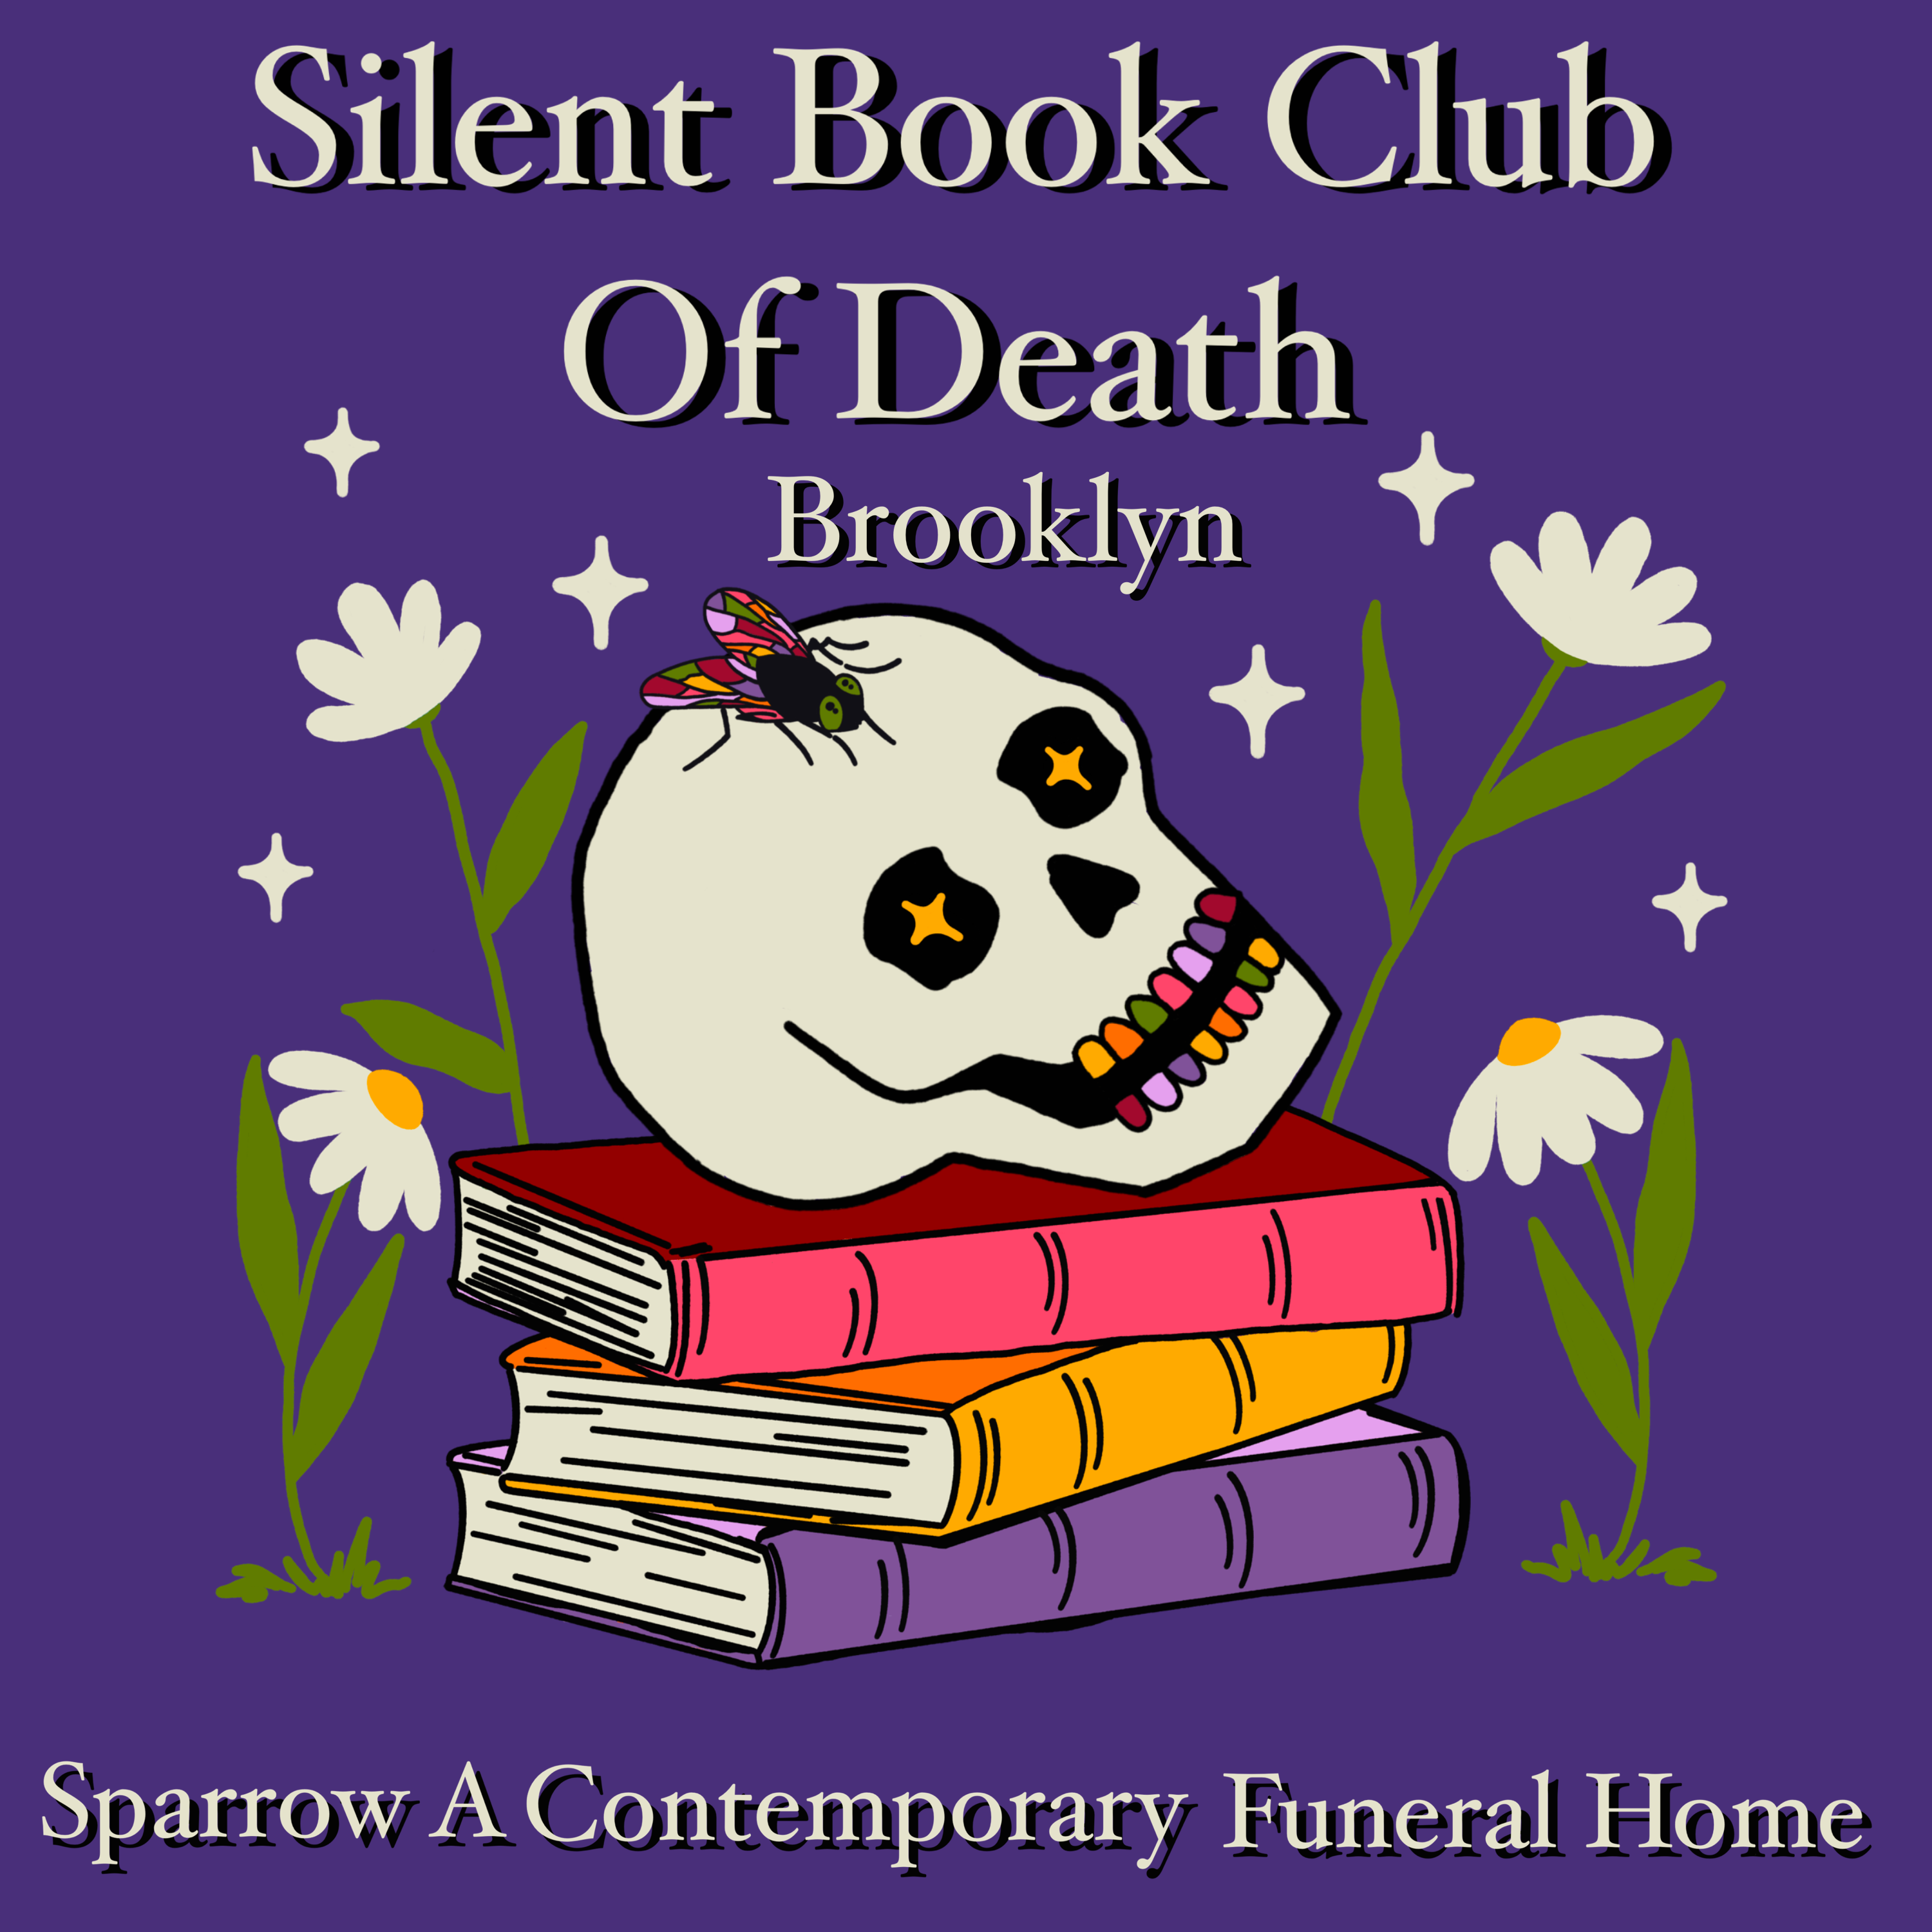 The Silent Book Club Of Death: Brooklyn Chapter